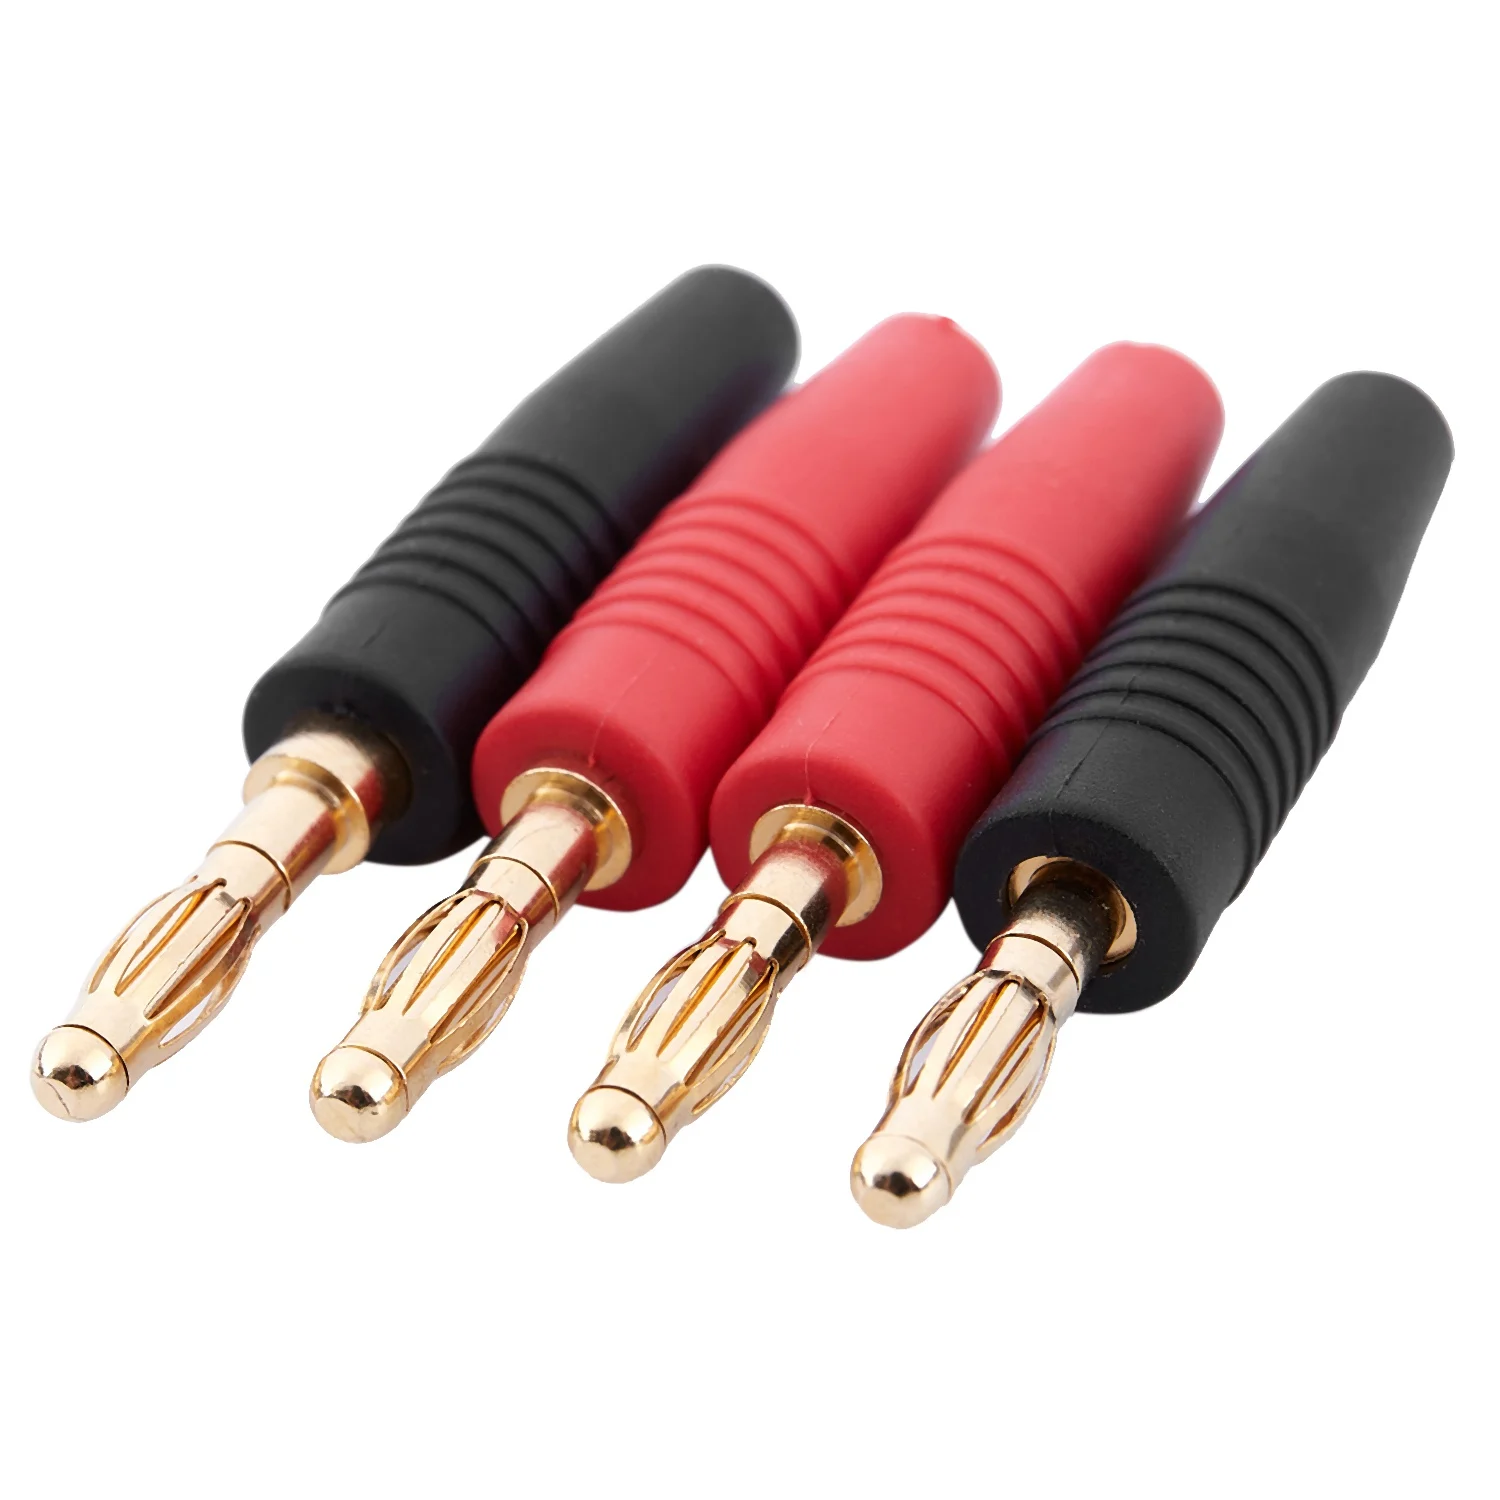 

4pcs 4mm B7 24K Gold Plated Musical Speaker Cable Wire Pin Banana Plug Connector